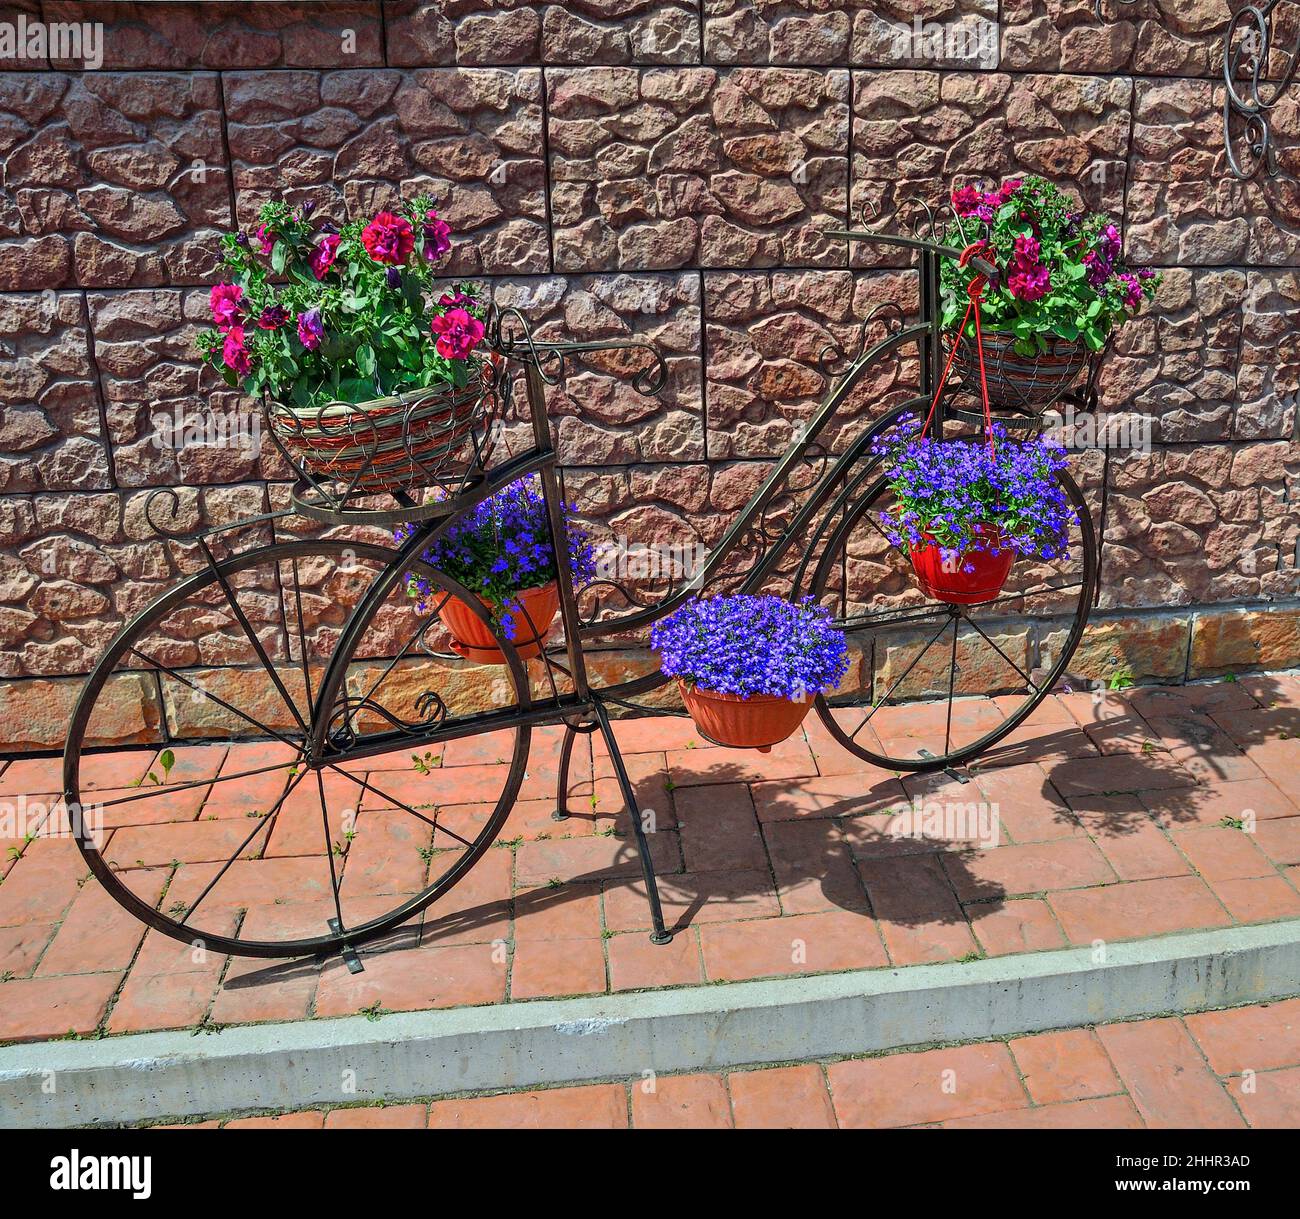 Decorative metal flower-stand bicycle with red petunia in baskets and blue lobelia flowers in flowerpots, standing outdoor near the wall - elegant dec Stock Photo